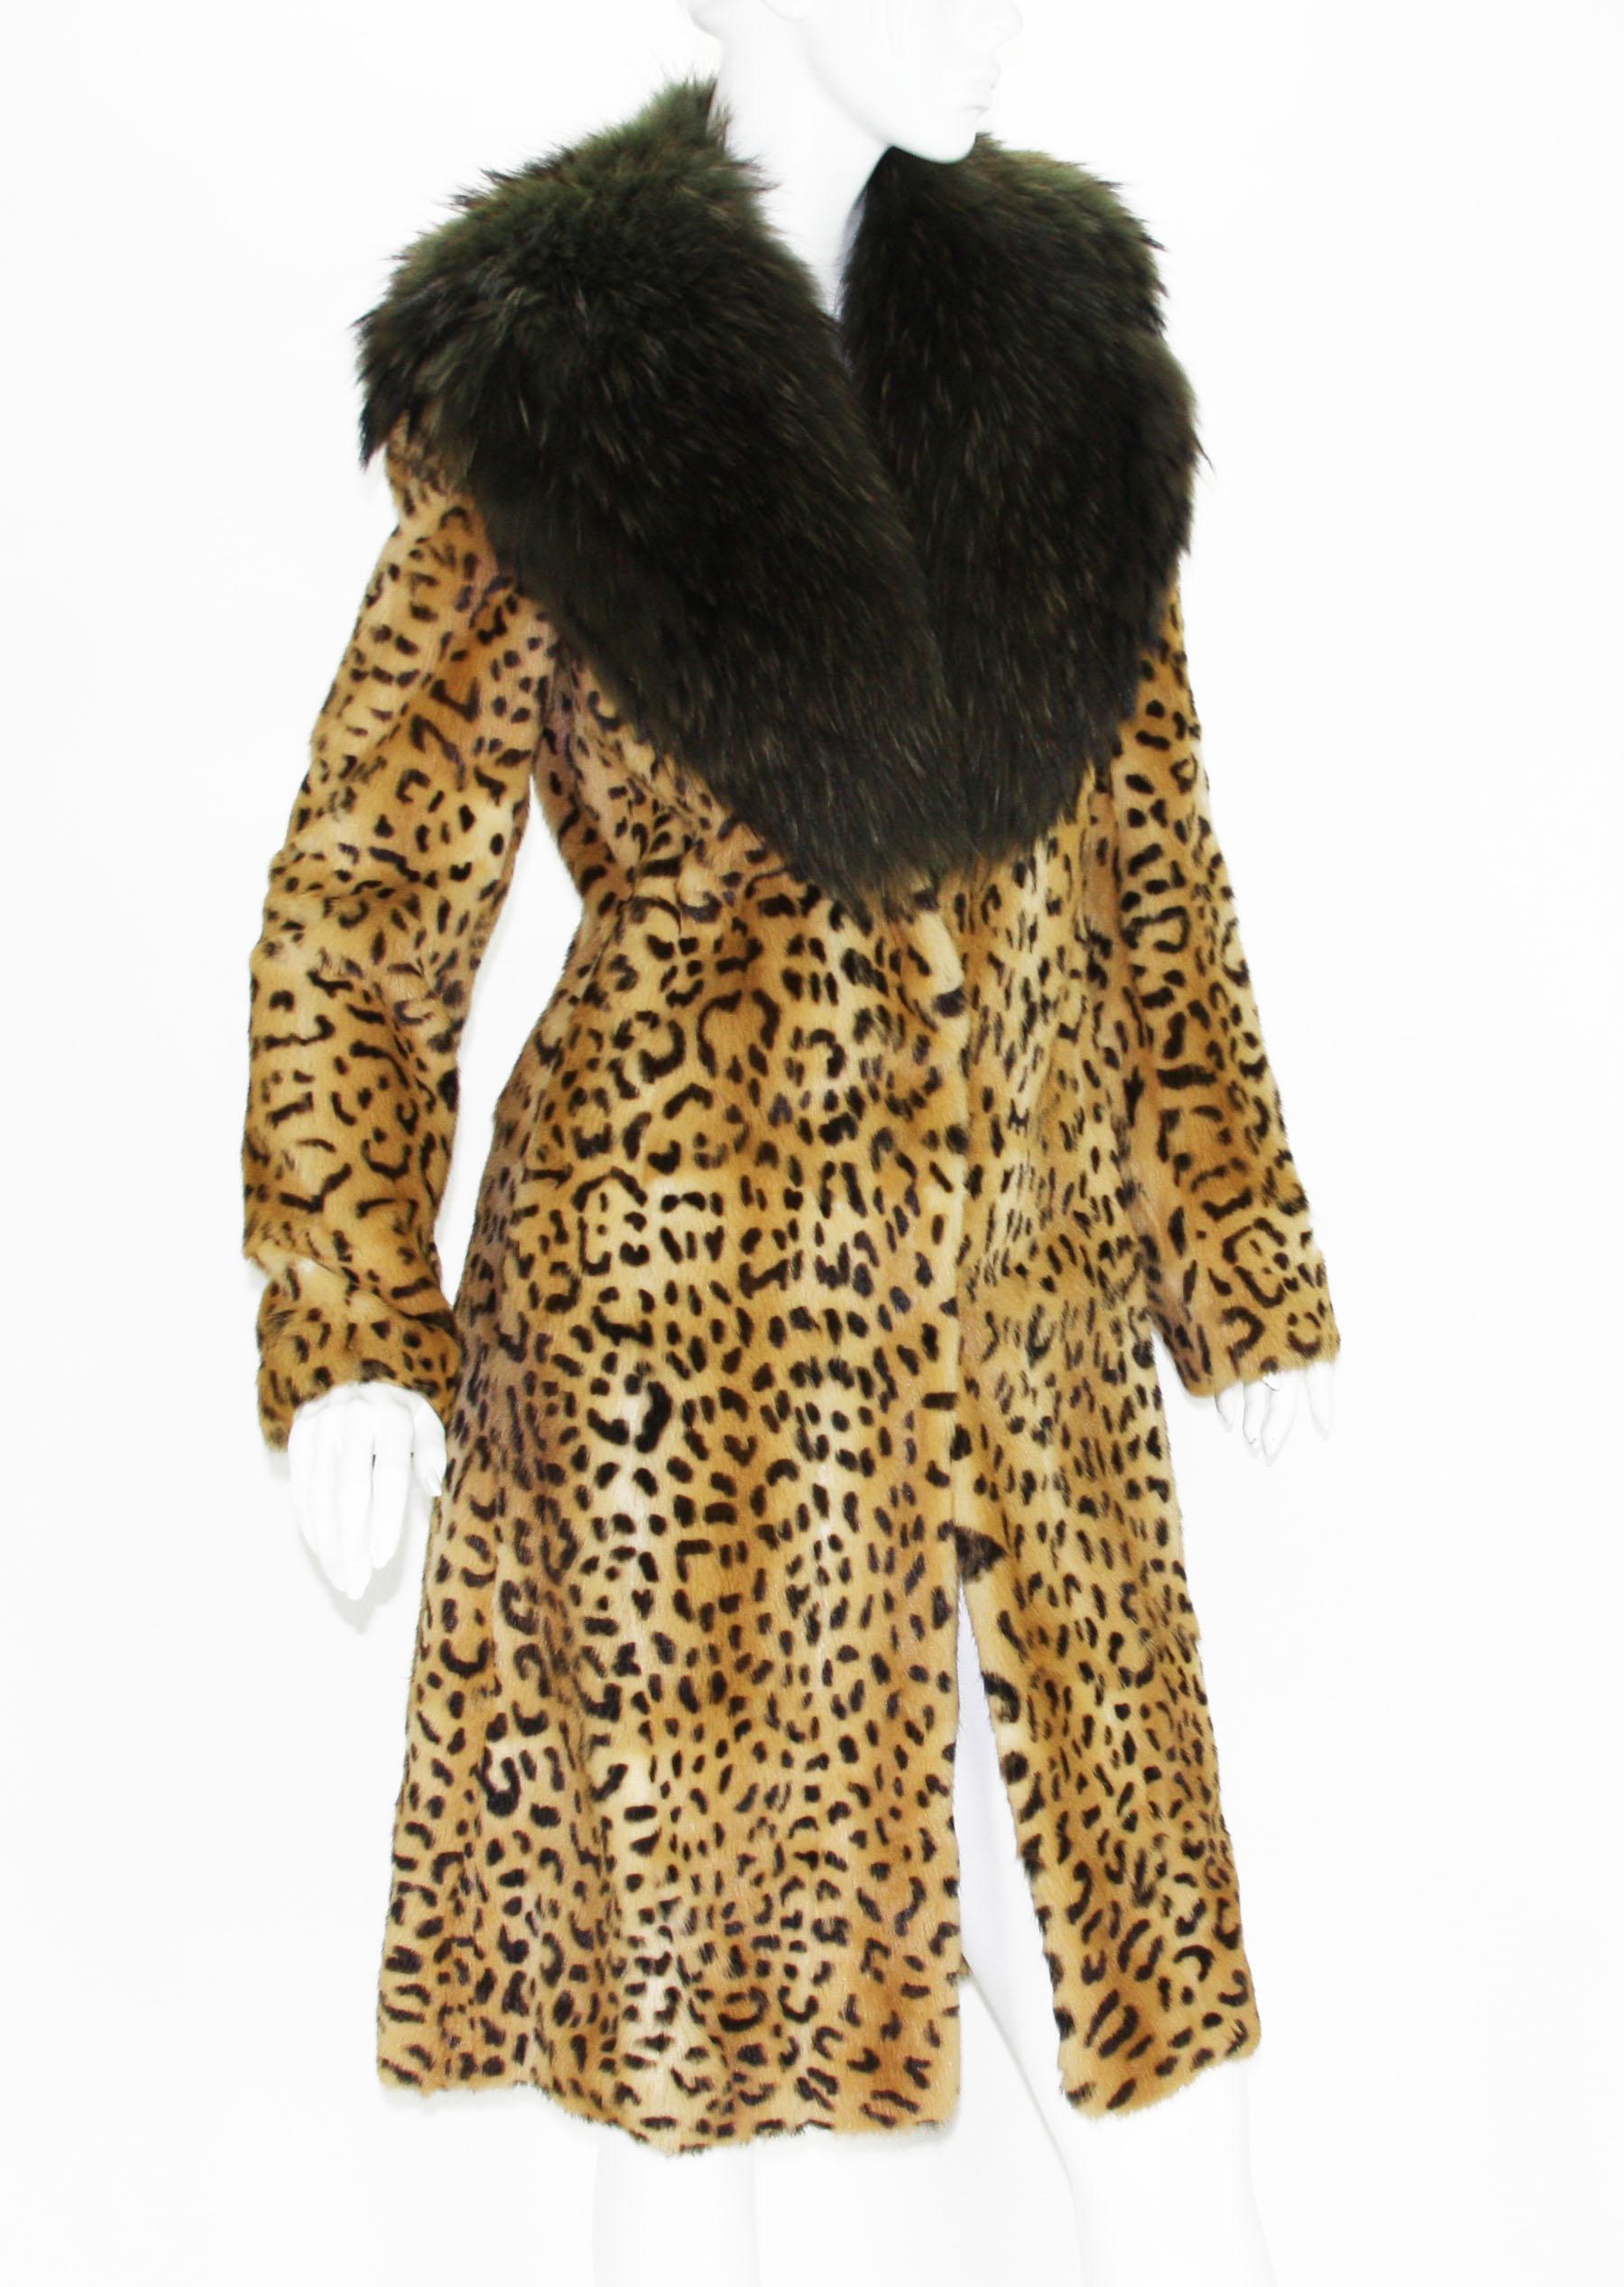 New Versace Real Mink Leopard Print Coat
Designer size - 38 ( pls. check measurements)
100% Real Mink, Oversize Raccoon Fur Collar, 100% Silk Lining, Two Side Pockets, One Inner Pocket, Hook and Eye Closure, Light Weight.
Measurements: Length - 40